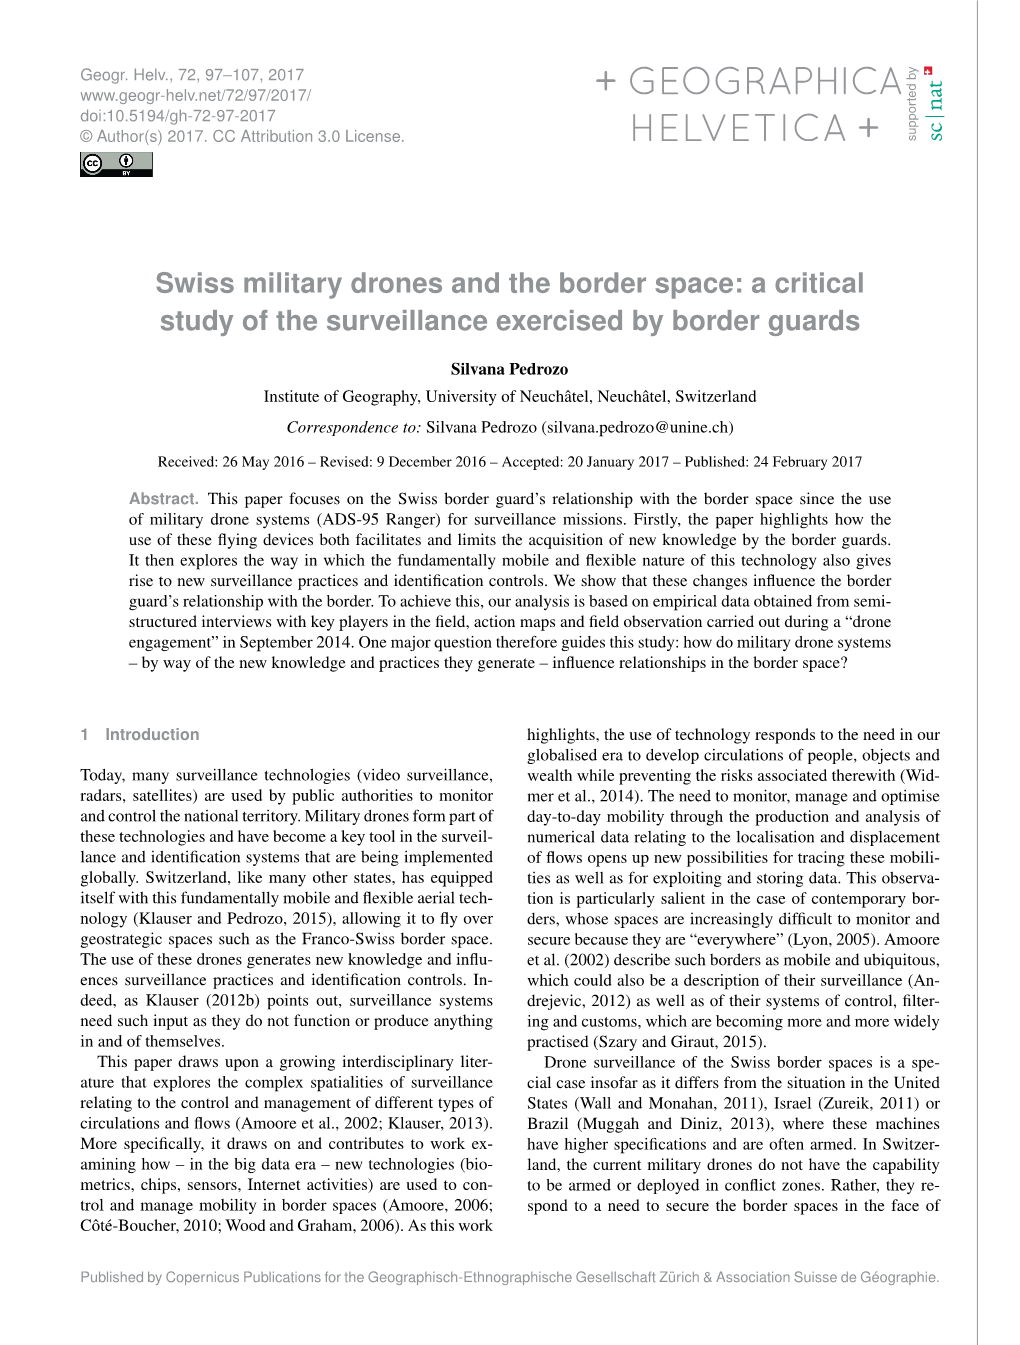 Swiss Military Drones and the Border Space: a Critical Study of the Surveillance Exercised by Border Guards